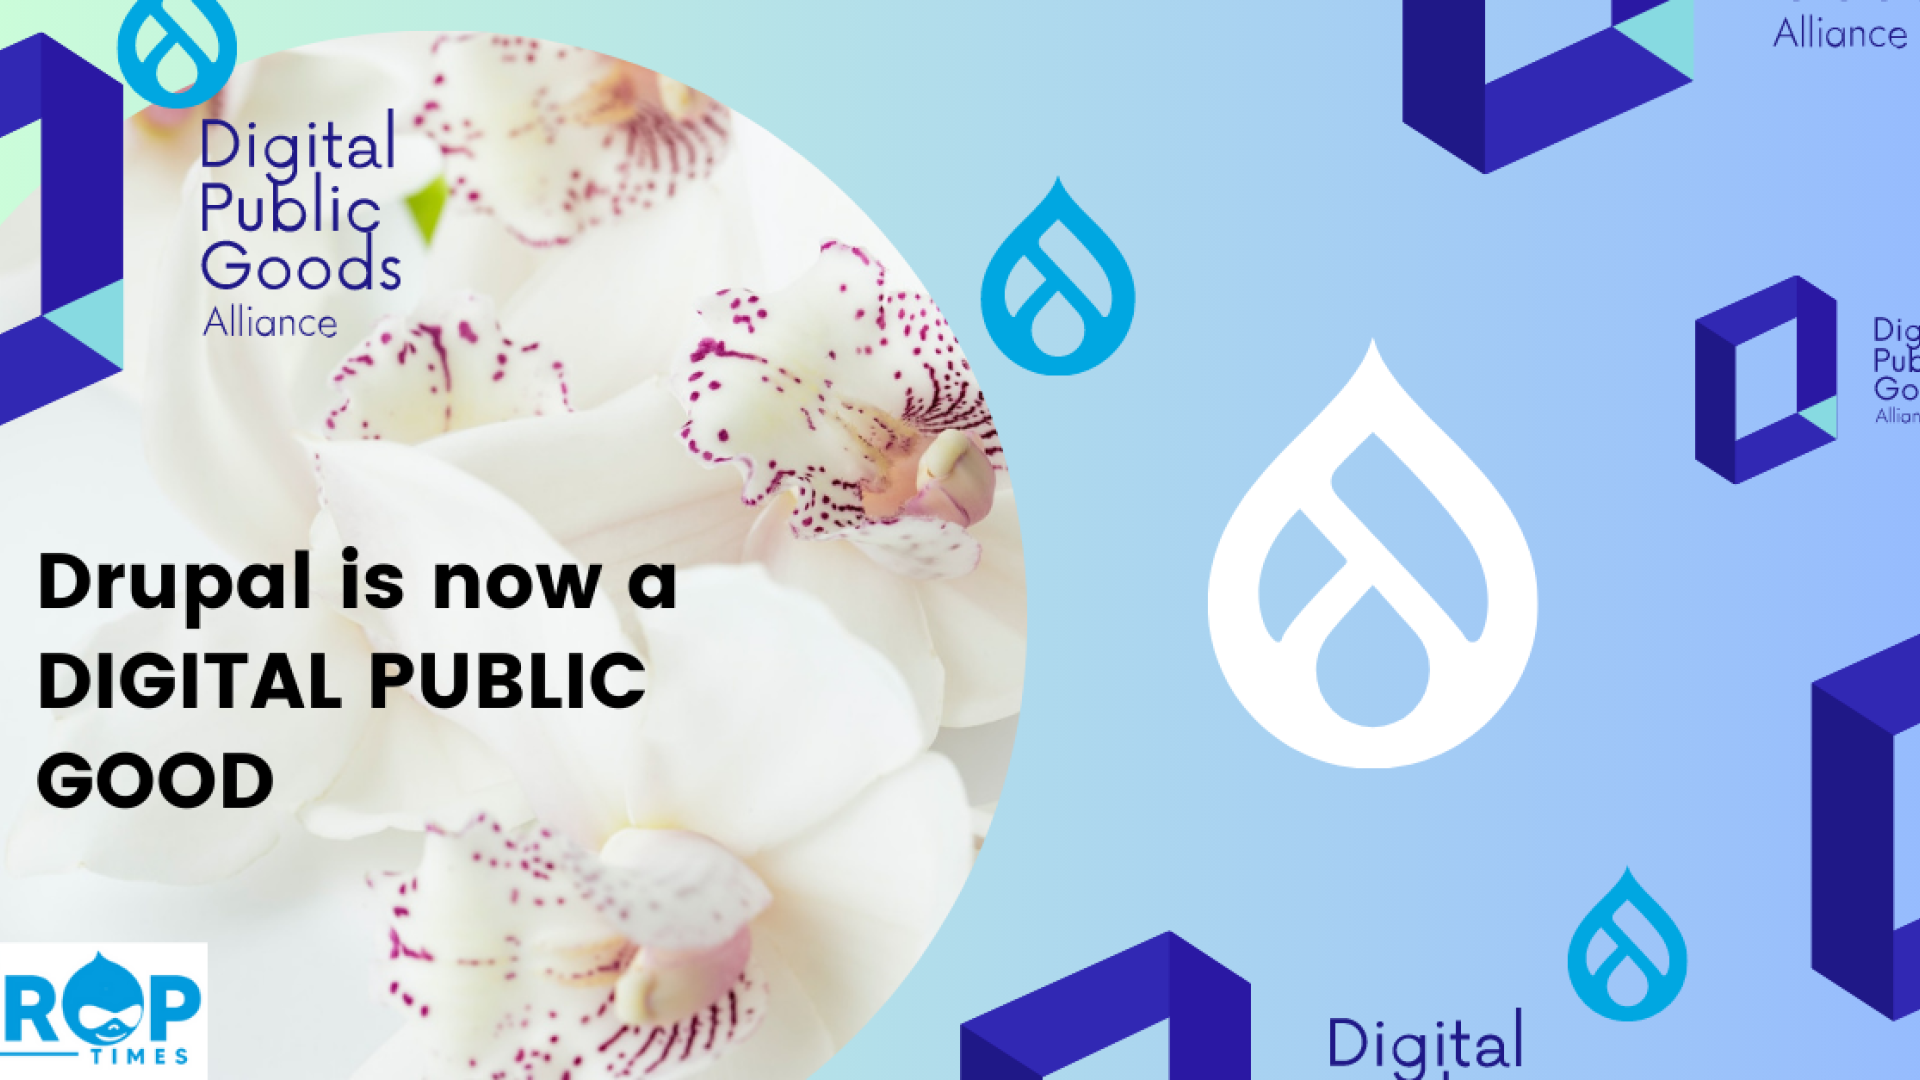 Graphic depicting the announcement of Drupal being designated as a Digital Public Good. A picture of some Orchid flowers and the logos of Drupal and DPG Alliance is used.